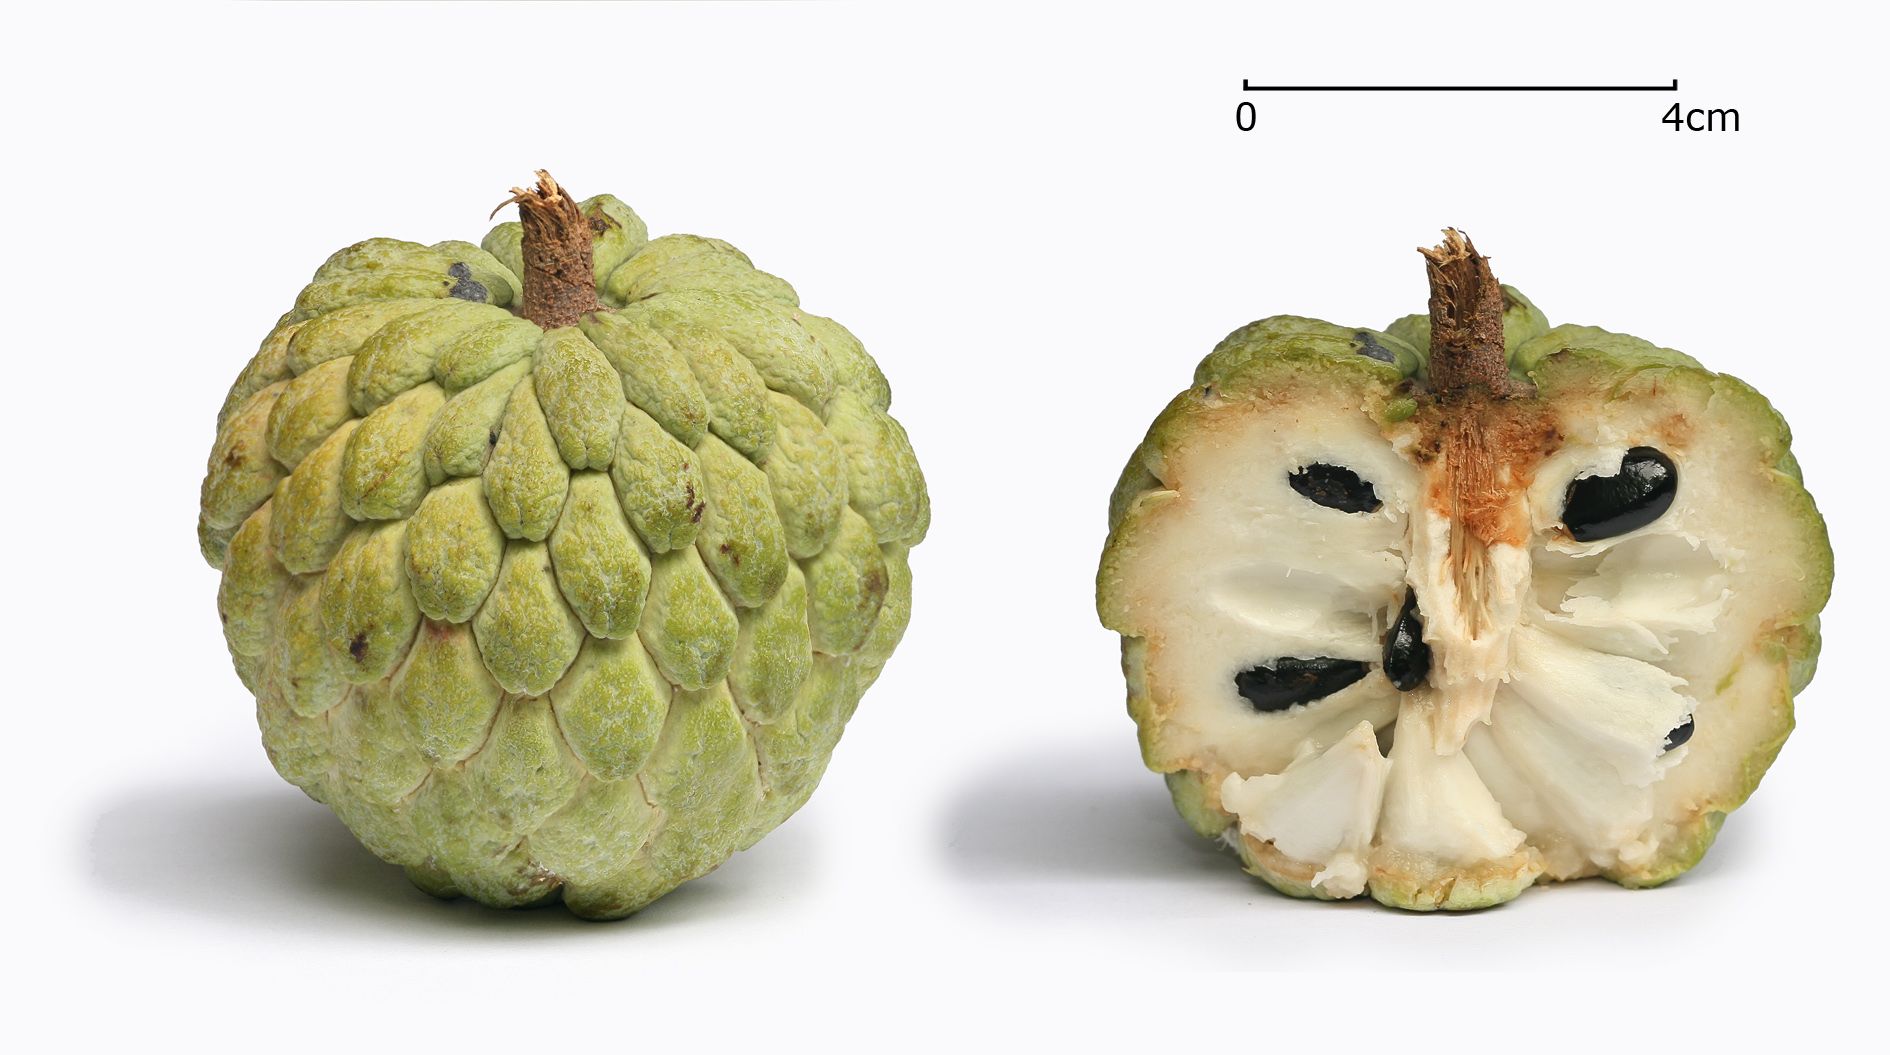 Sugar-apple - Annona squamosa - whole fruit, and in cross-section ...